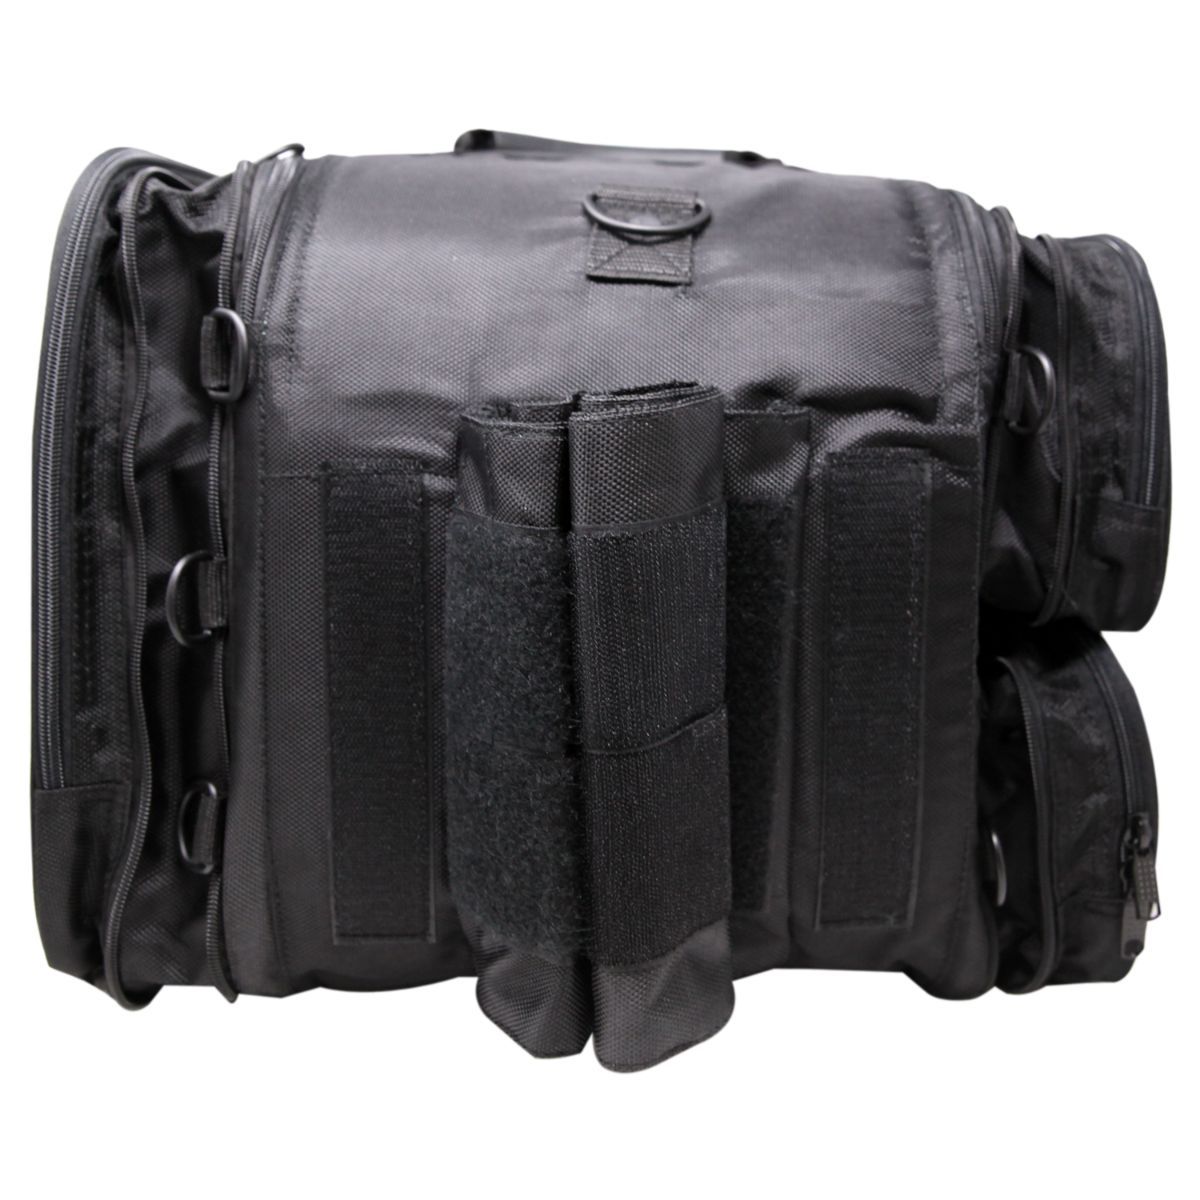 VS340 Power Pack Textile Trunk Pack with 3 Side Pockets